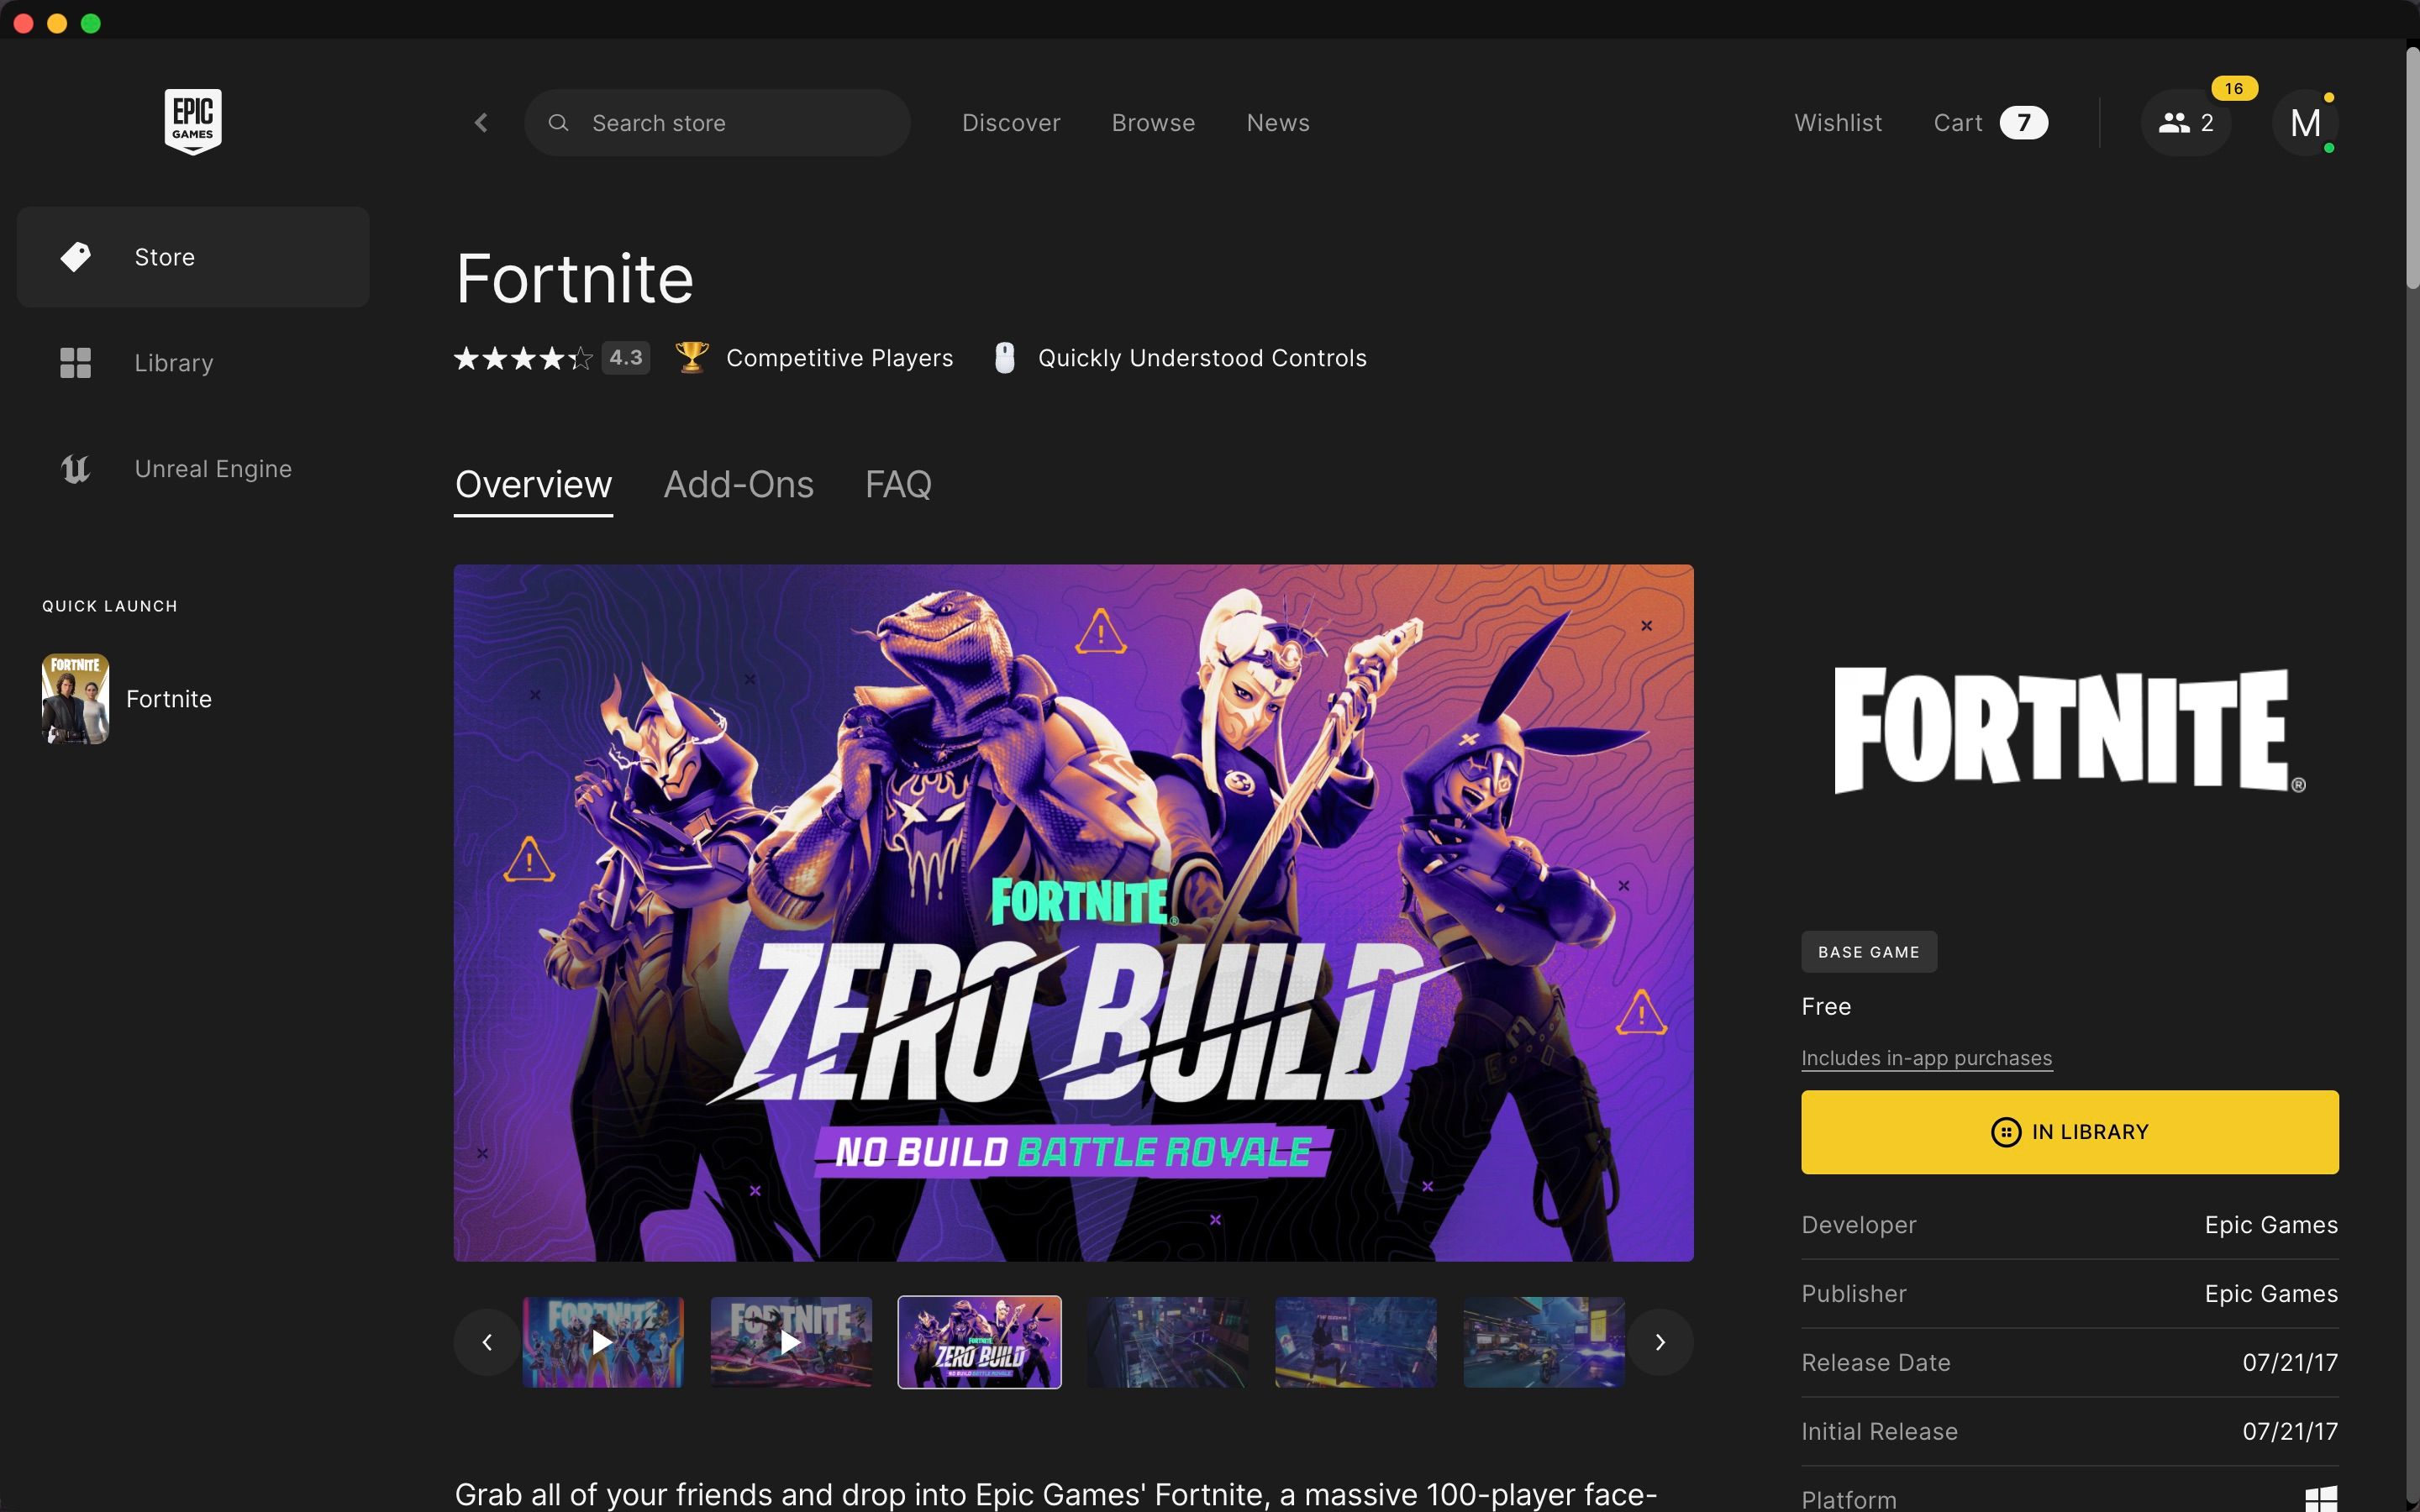 Fortnite's Epic Store page